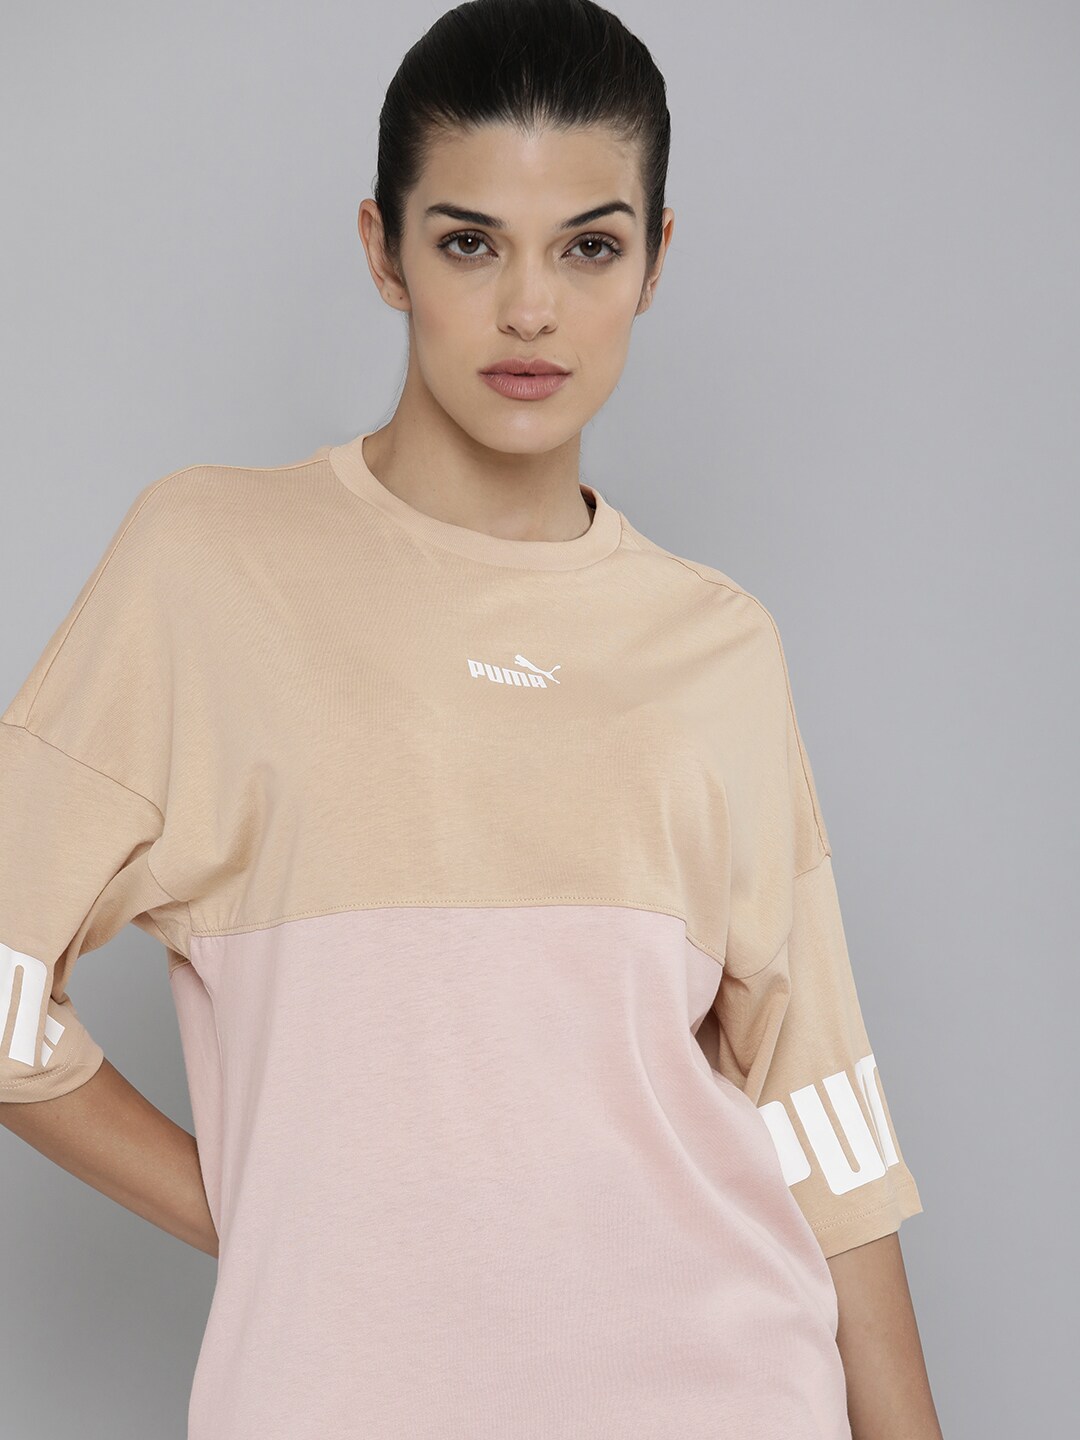 Puma Beige & Pink Colourblocked Extended Sleeves Pure Cotton Top Price in India